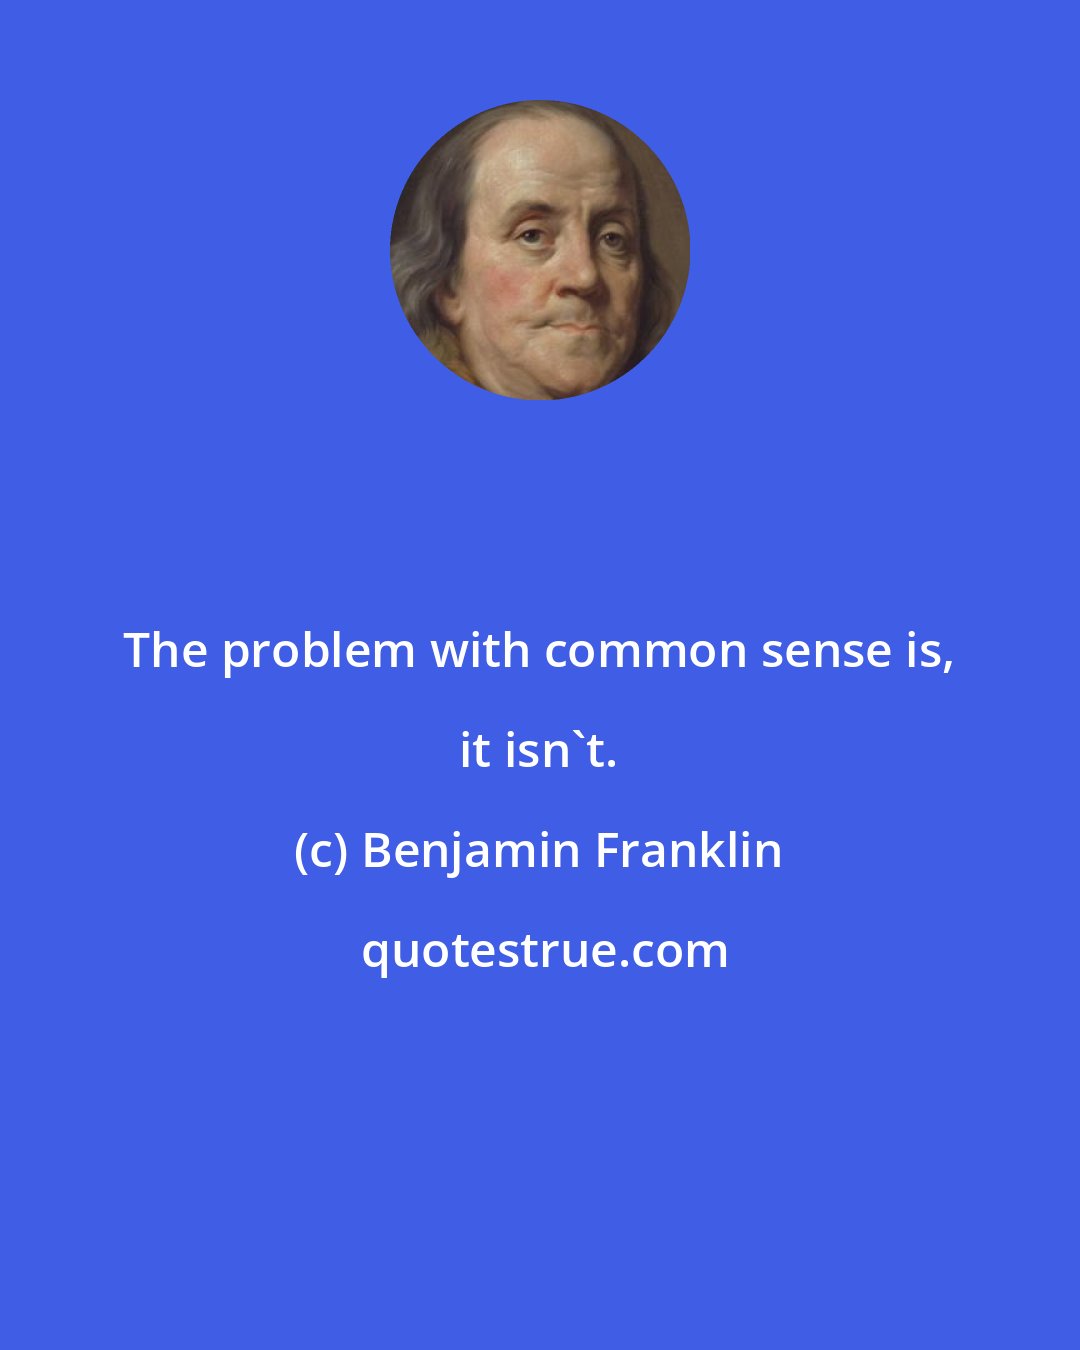 Benjamin Franklin: The problem with common sense is, it isn't.